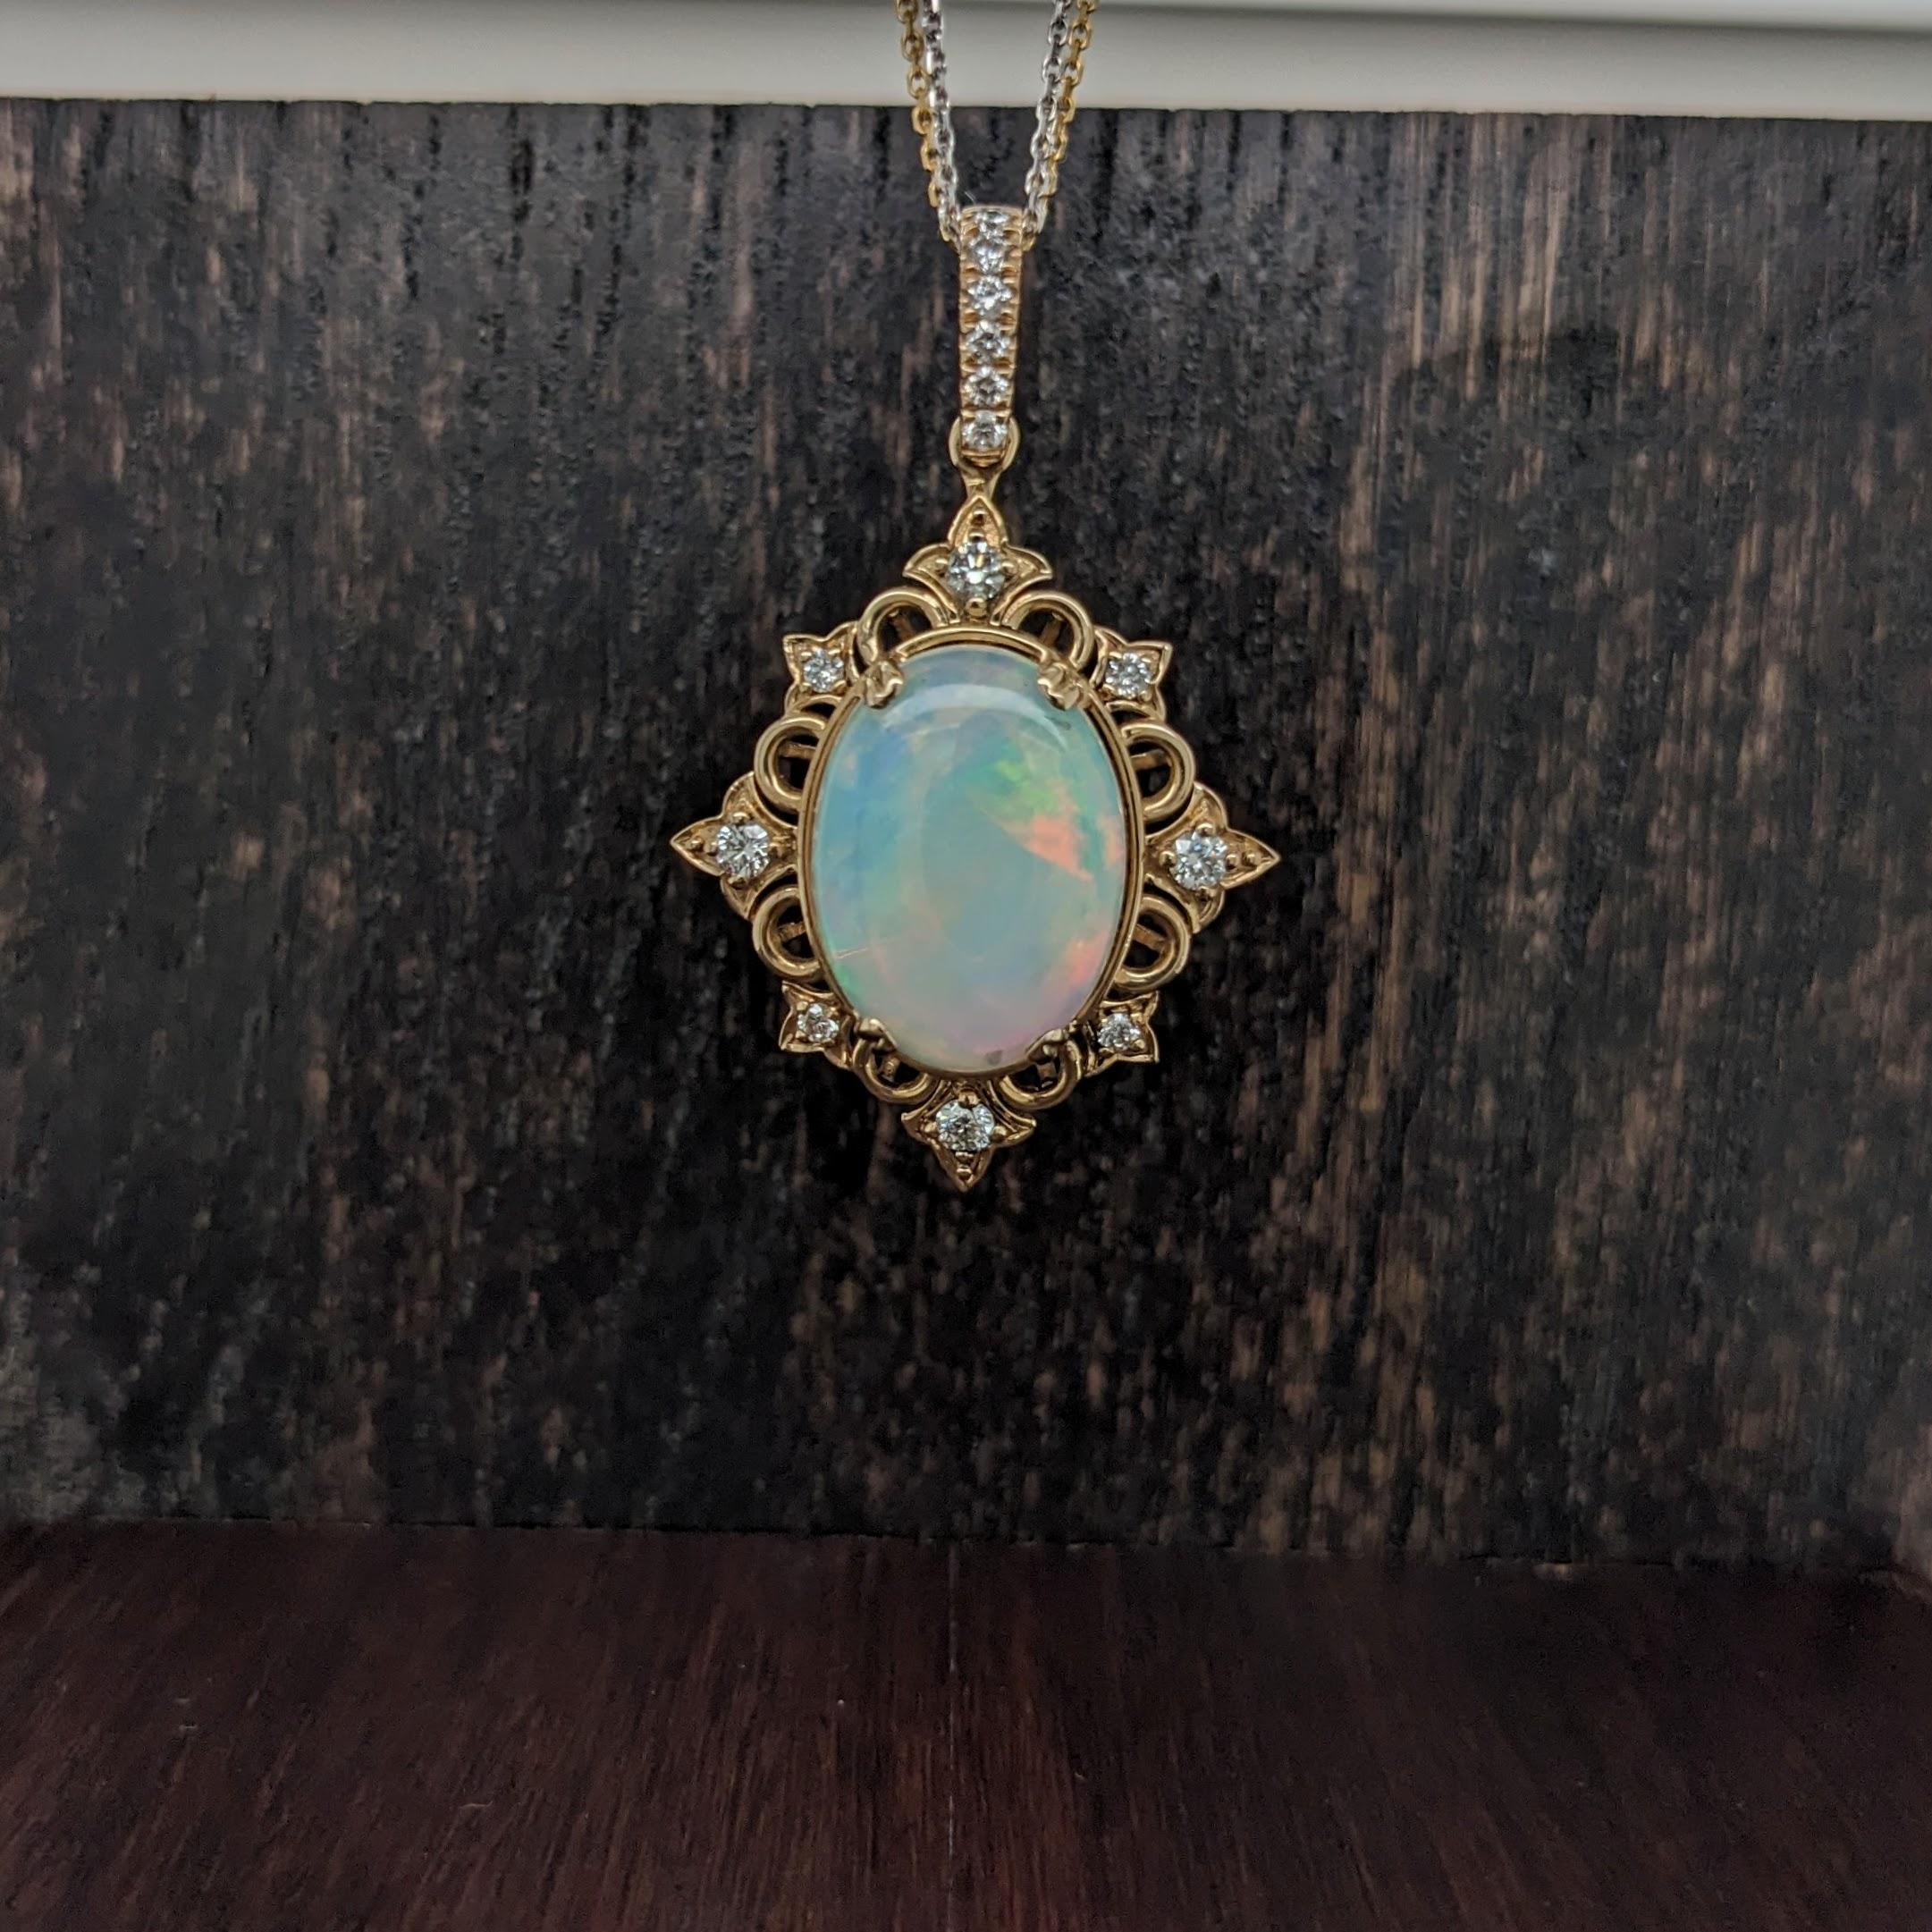 Cabochon 4.57ct Opal Pendant w Diamond Accents in Solid 14k Yellow Gold Oval 16.7x12.3mm For Sale